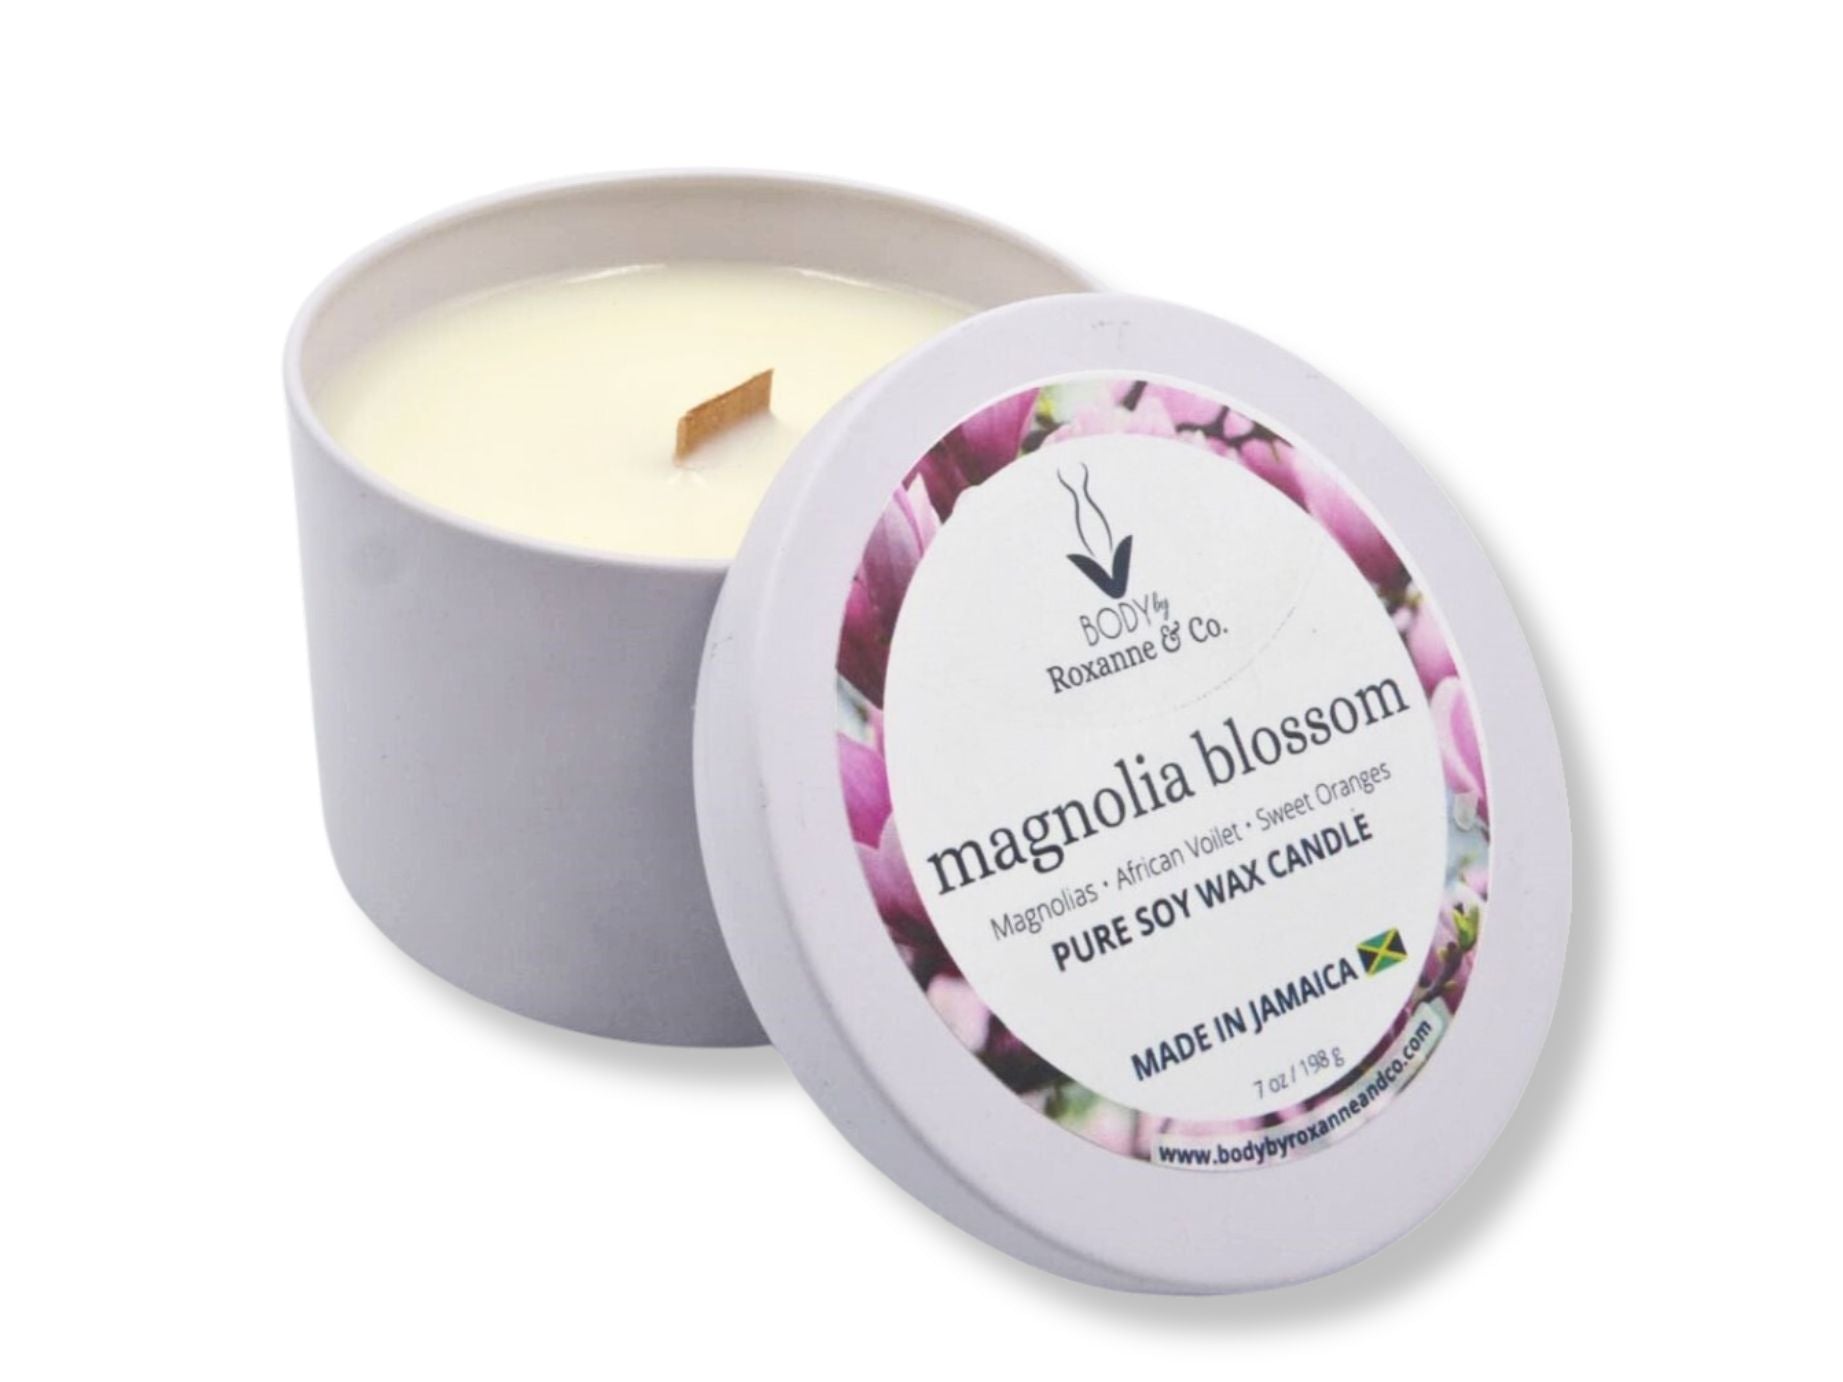 Magnolia Blossom Soy Wax Candle